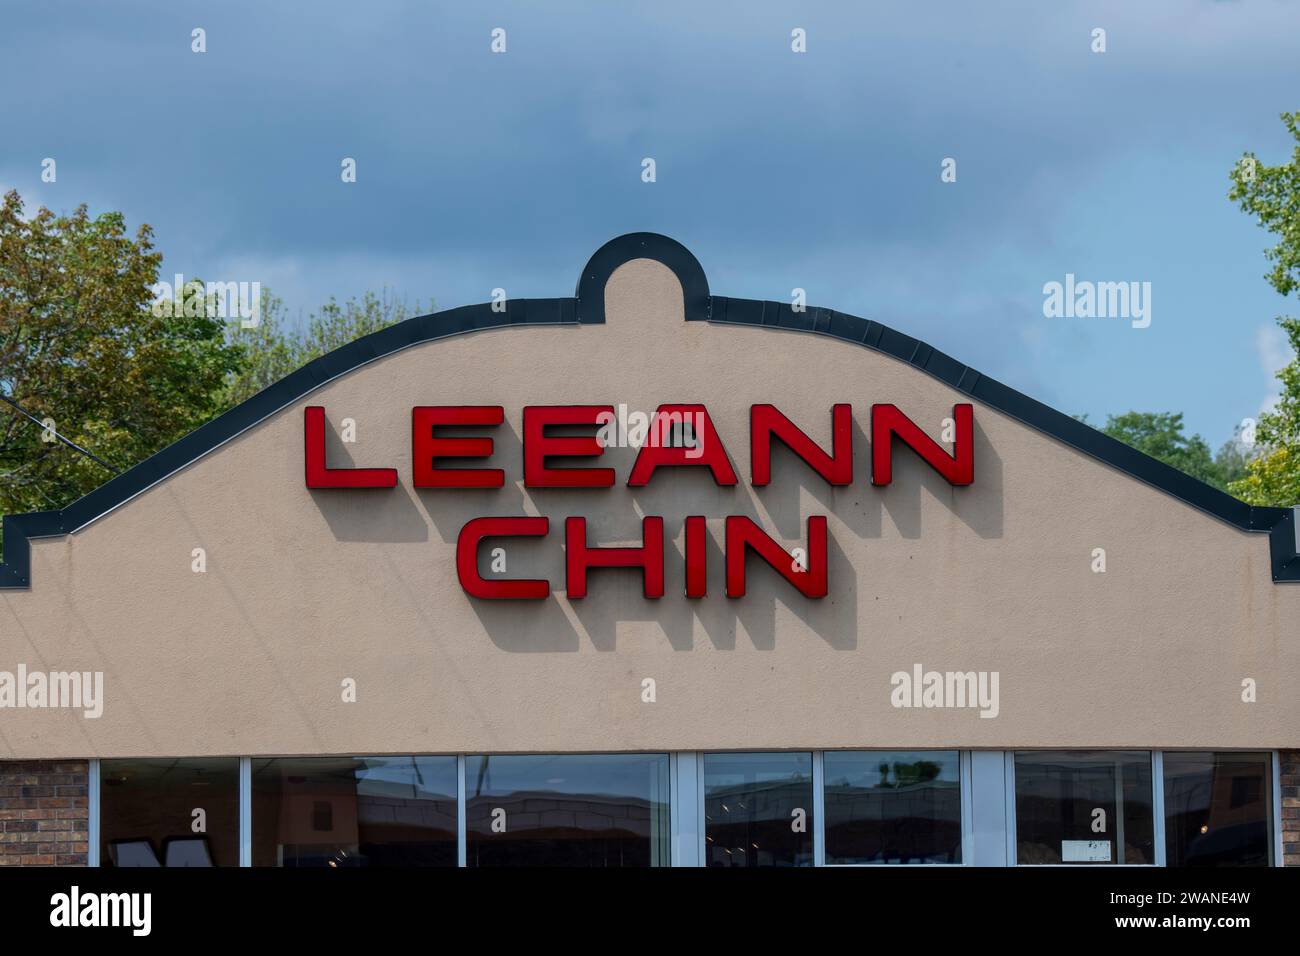 West St. Paul, Minnesota. Leeann Chin is an Asian quick service restaurant chain. The chain offers chicken entrees, beef and shrimp options, prepared Stock Photo